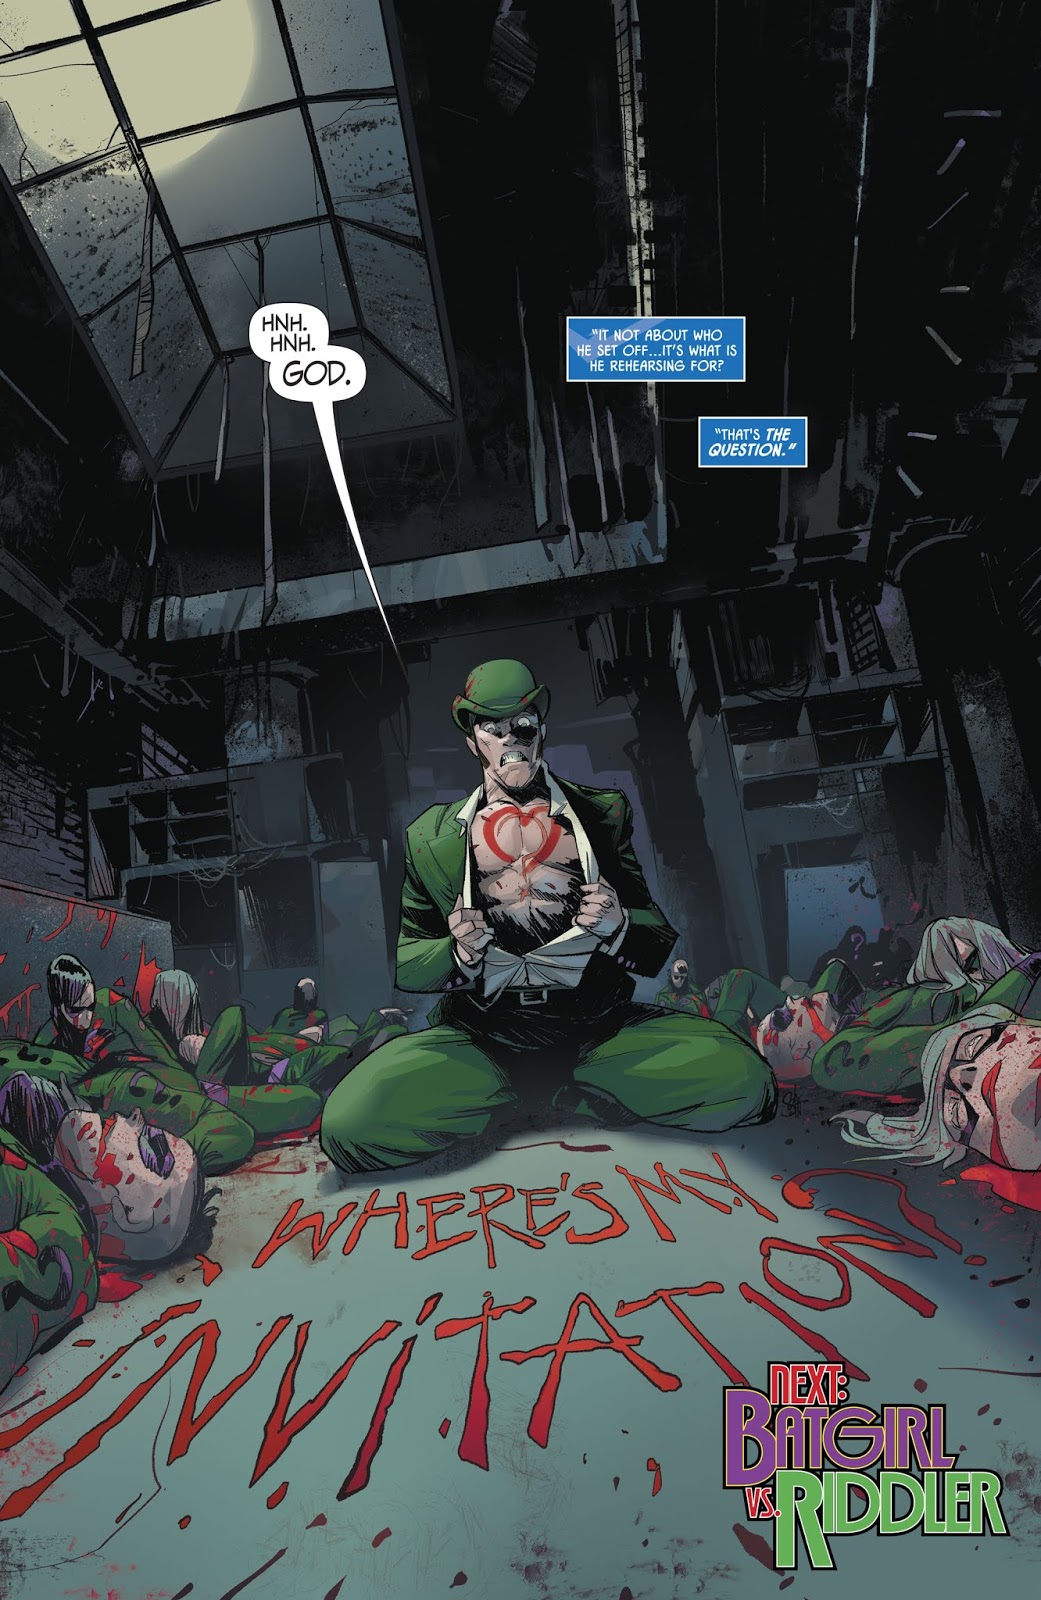 The Riddler (Batman: Prelude To The Wedding)